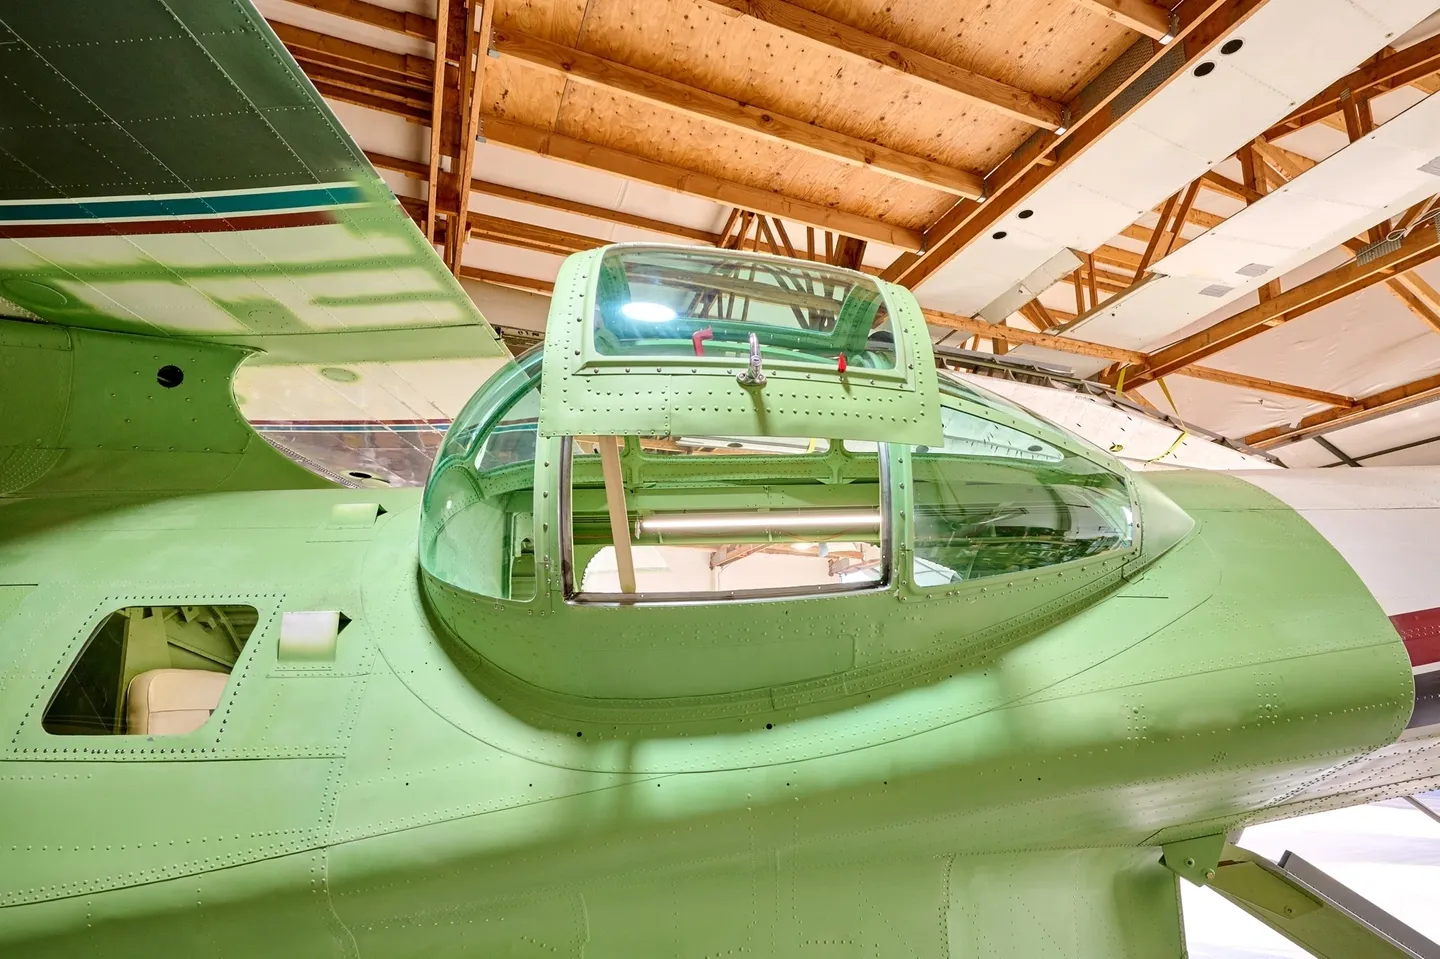 A green airplane in an air field with wooden ceiling.